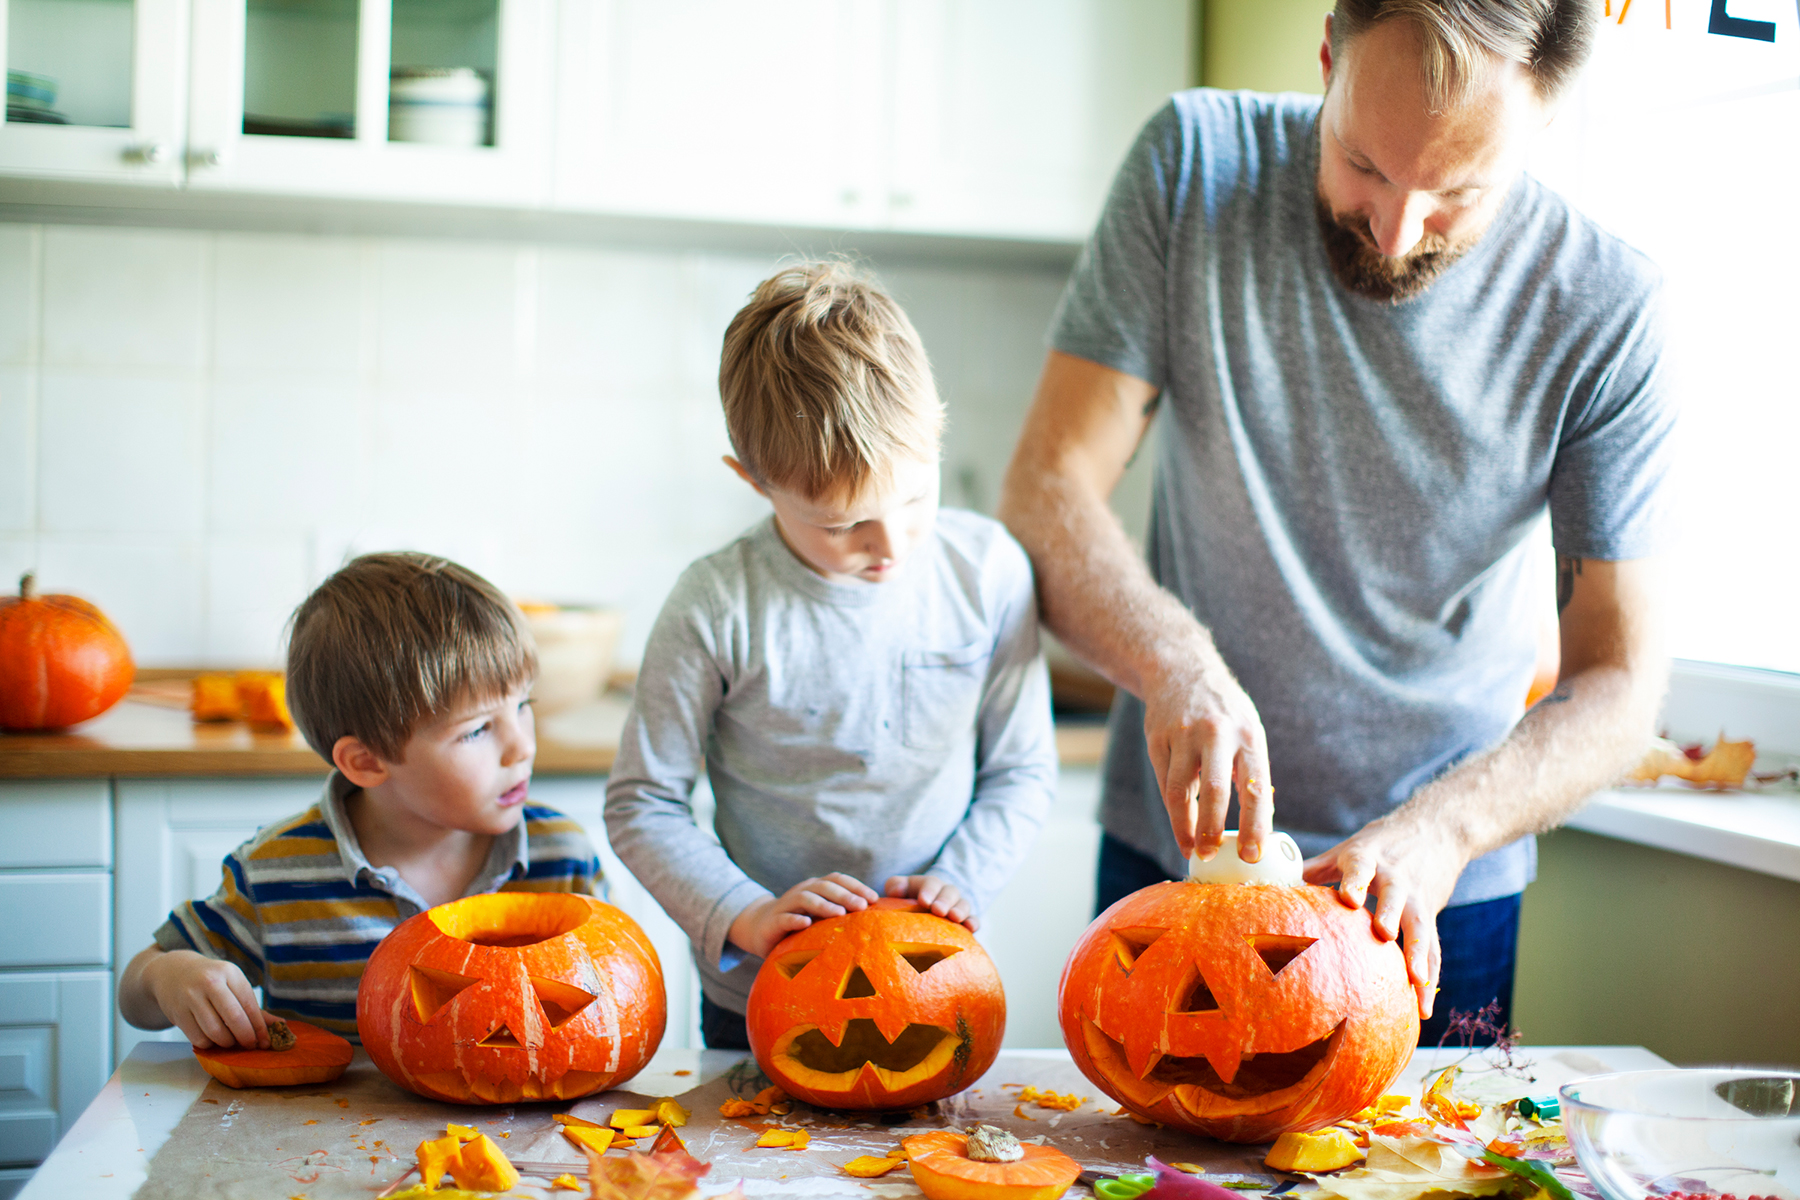 A photo of a dad and his two sons carving pumpkins together in the kitchen